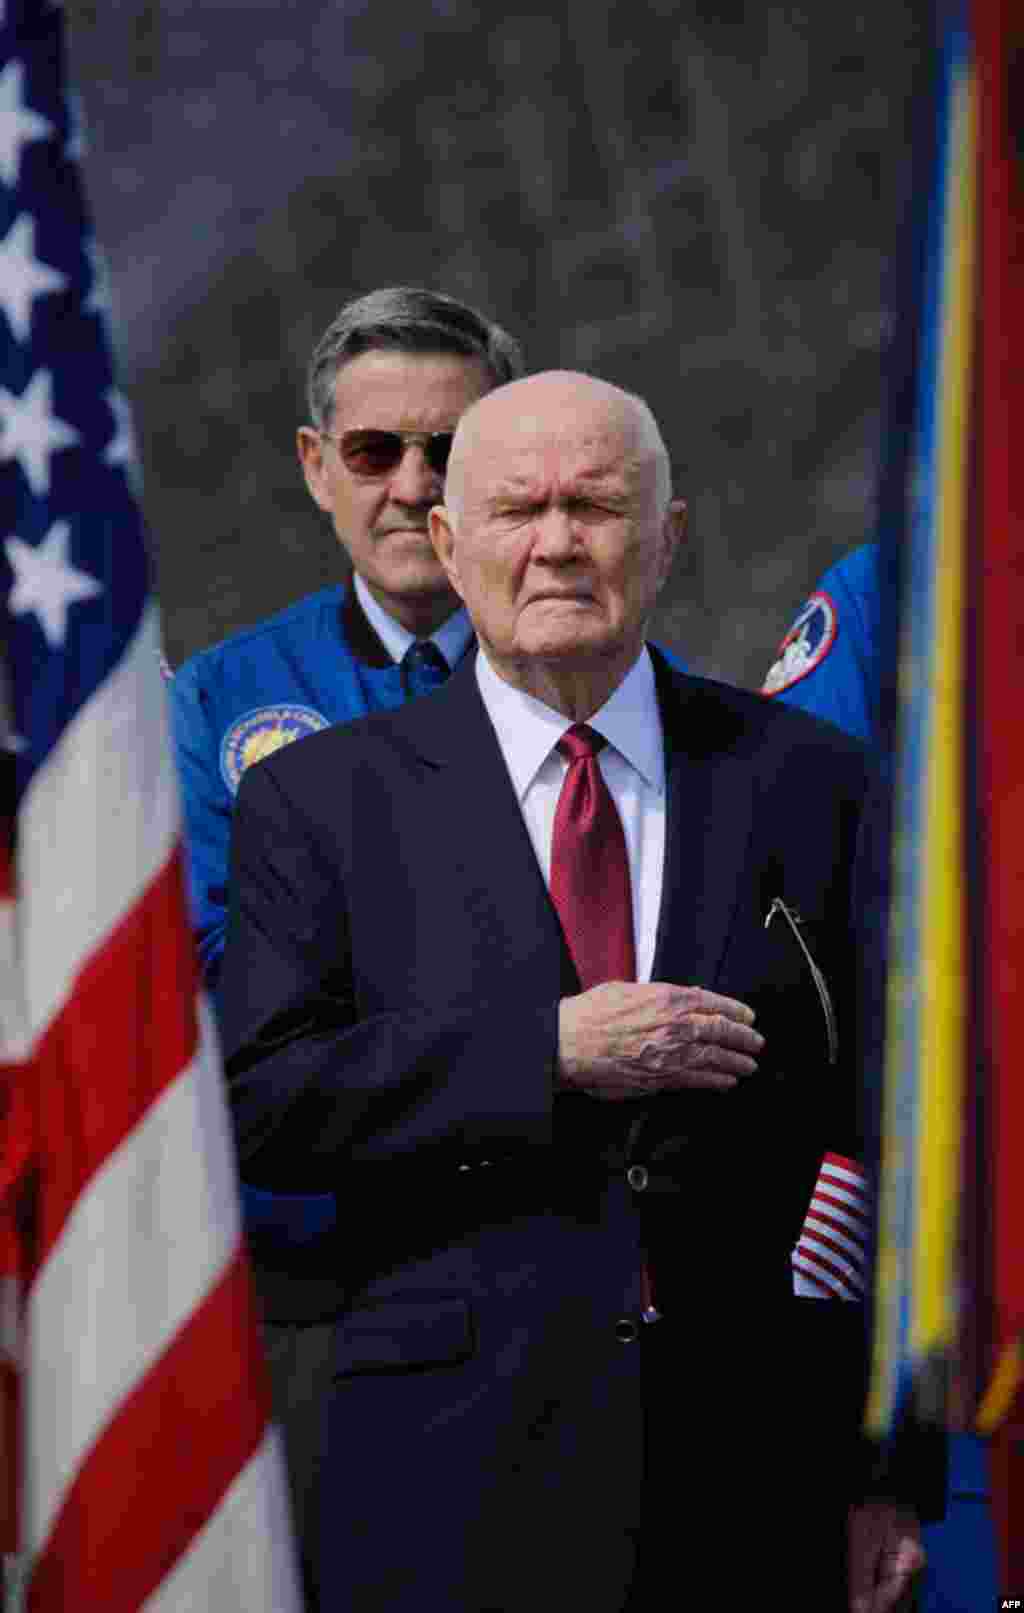 Former astronaut and US Senator John Glenn holds his hand to his heart during the playing of the National Anthem at the transfer ceremony for space shuttle Discovery. (NASA/Paul E. Alers)